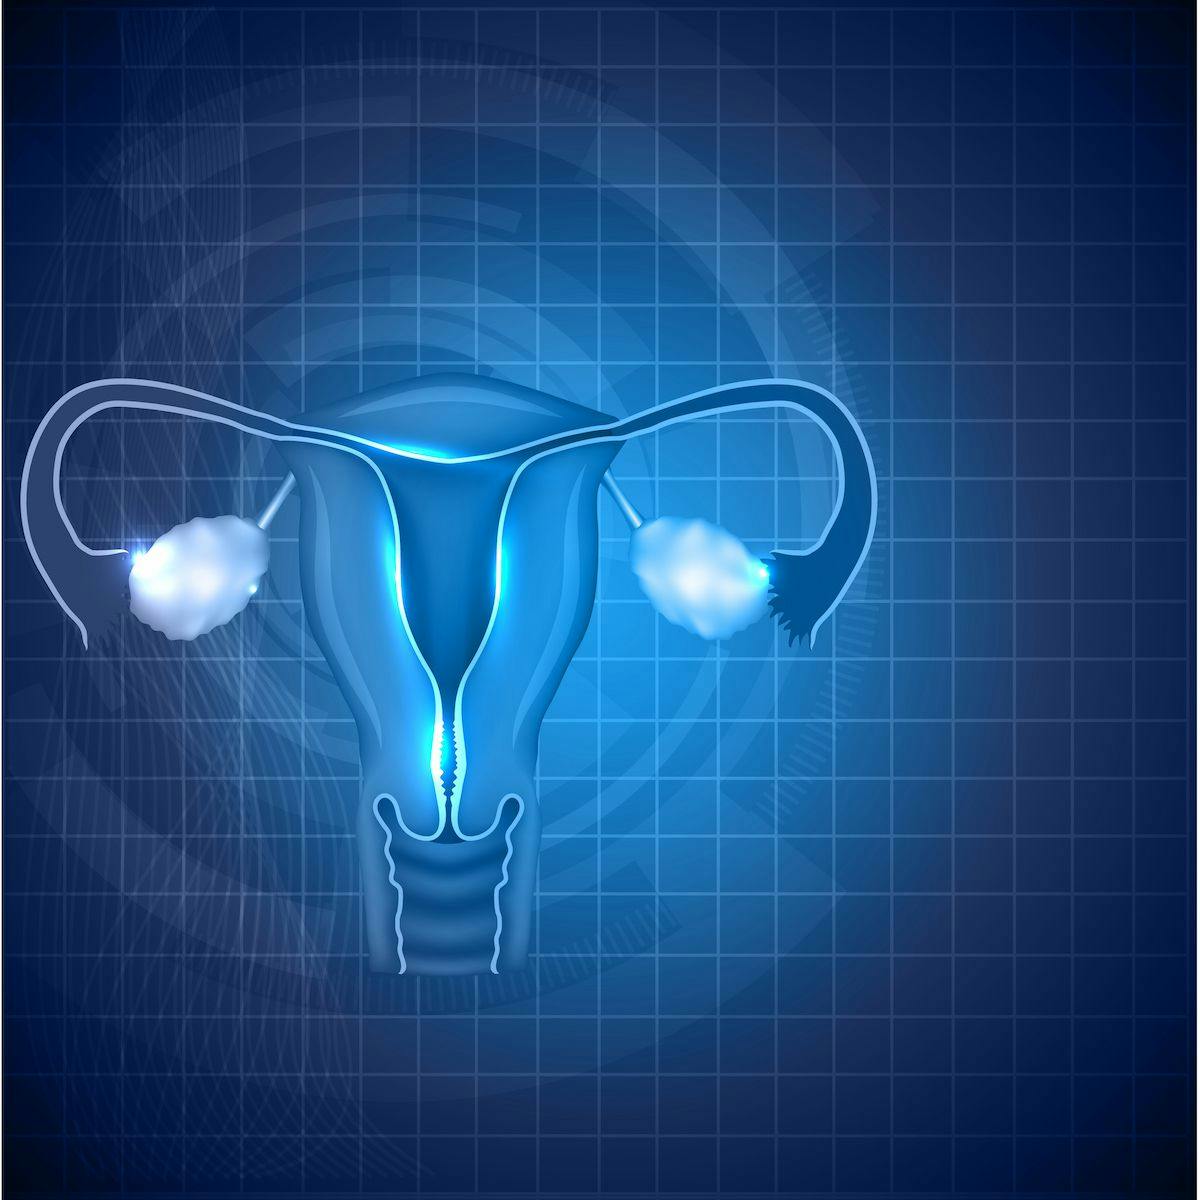 Topline findings from the phase 3 SIENDO trial did not appear to likely support a supplemental new drug application use of selinexor in patients with advanced or recurrent TP53 wild-type endometrial cancer, prompting the creation of a new phase 3 trial to support a future submission.